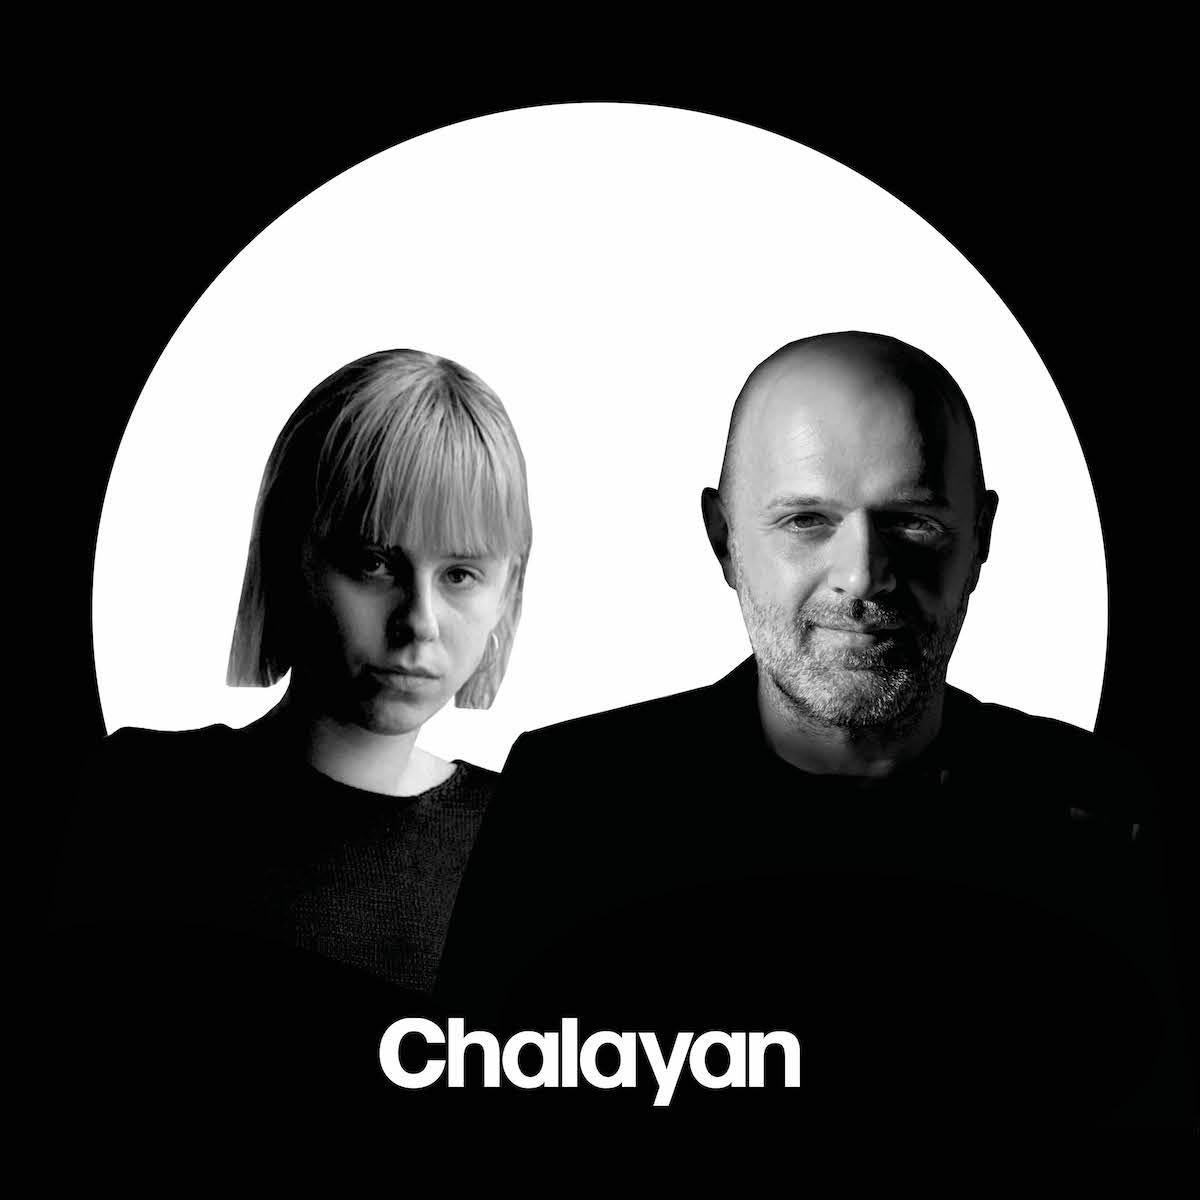 Chalayan 'Elise By Olsen In Conversation With Hussein Chalayan'